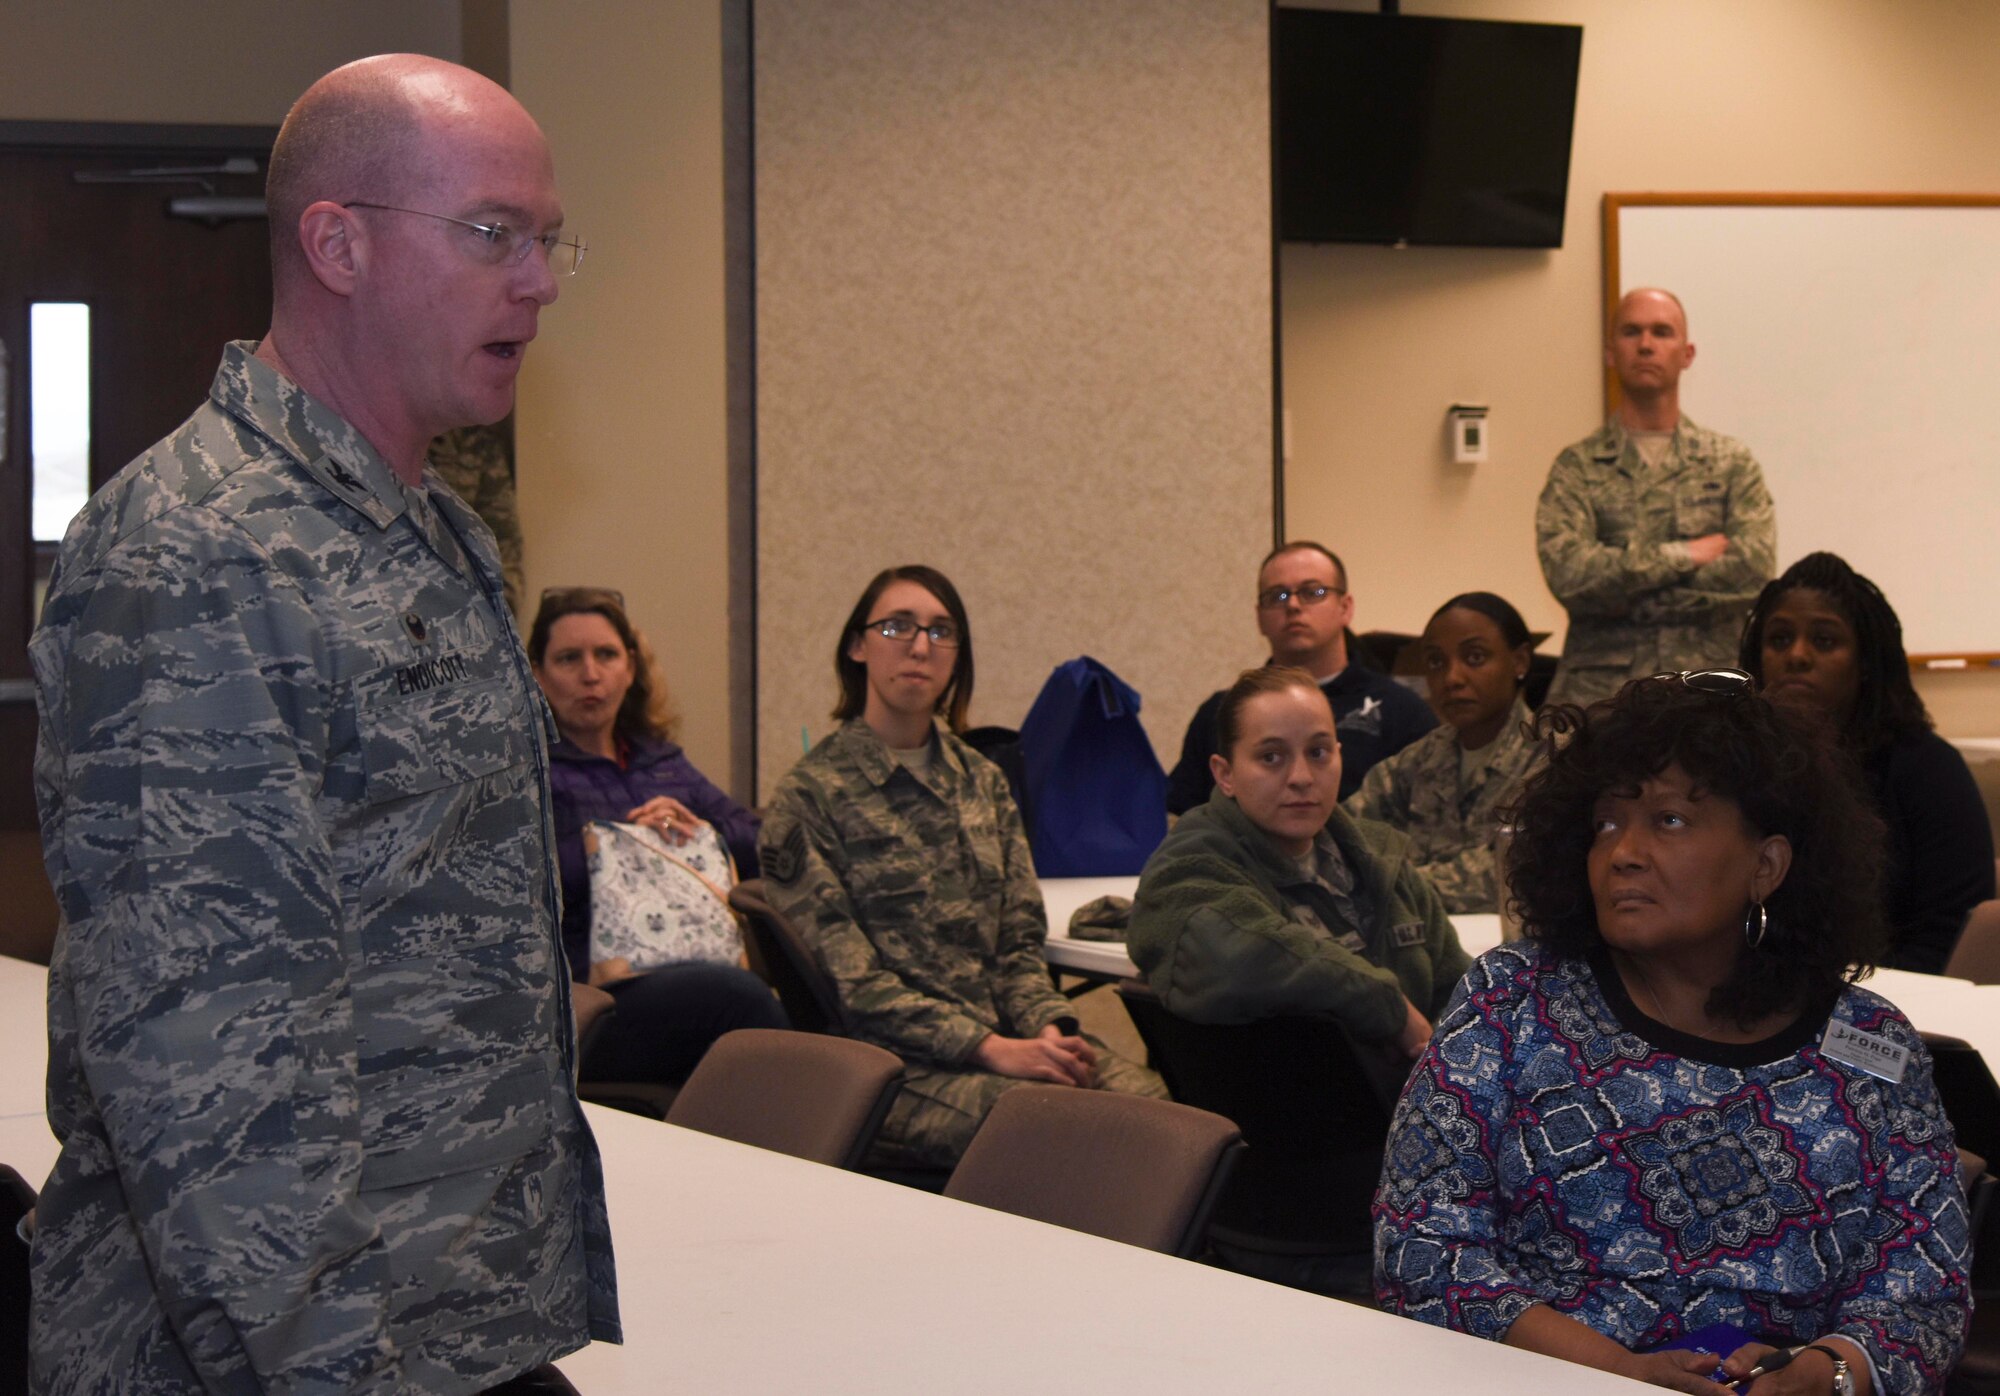 Attendees discussed personal experiences and concerns regarding the base. (U.S. Air Force photo by, Airman 1st Class Michael D. Mathews)